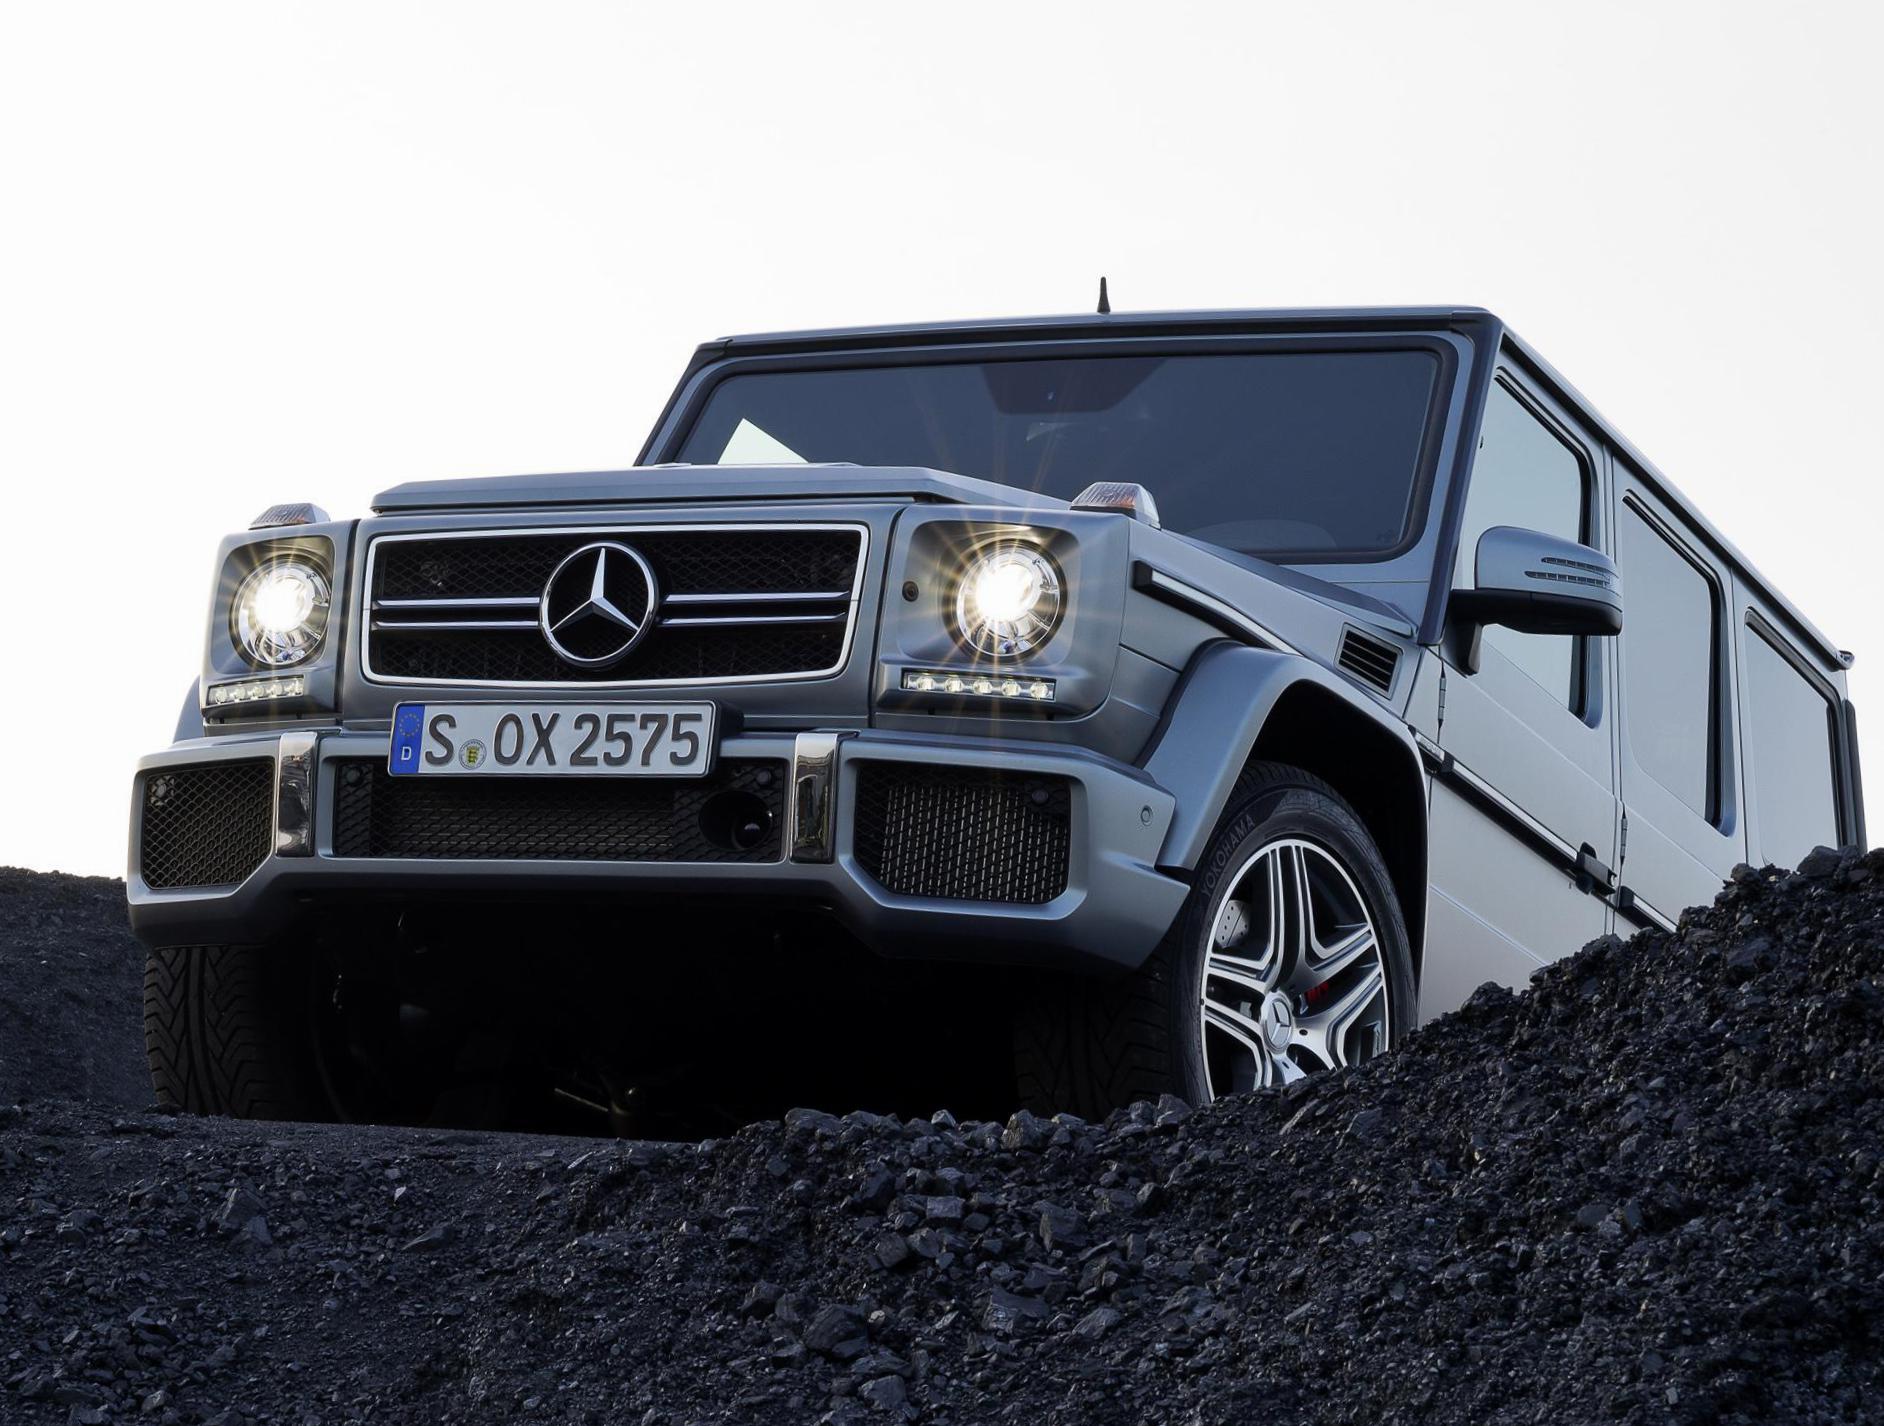 Mercedes G-Class AMG (W463) used 2011